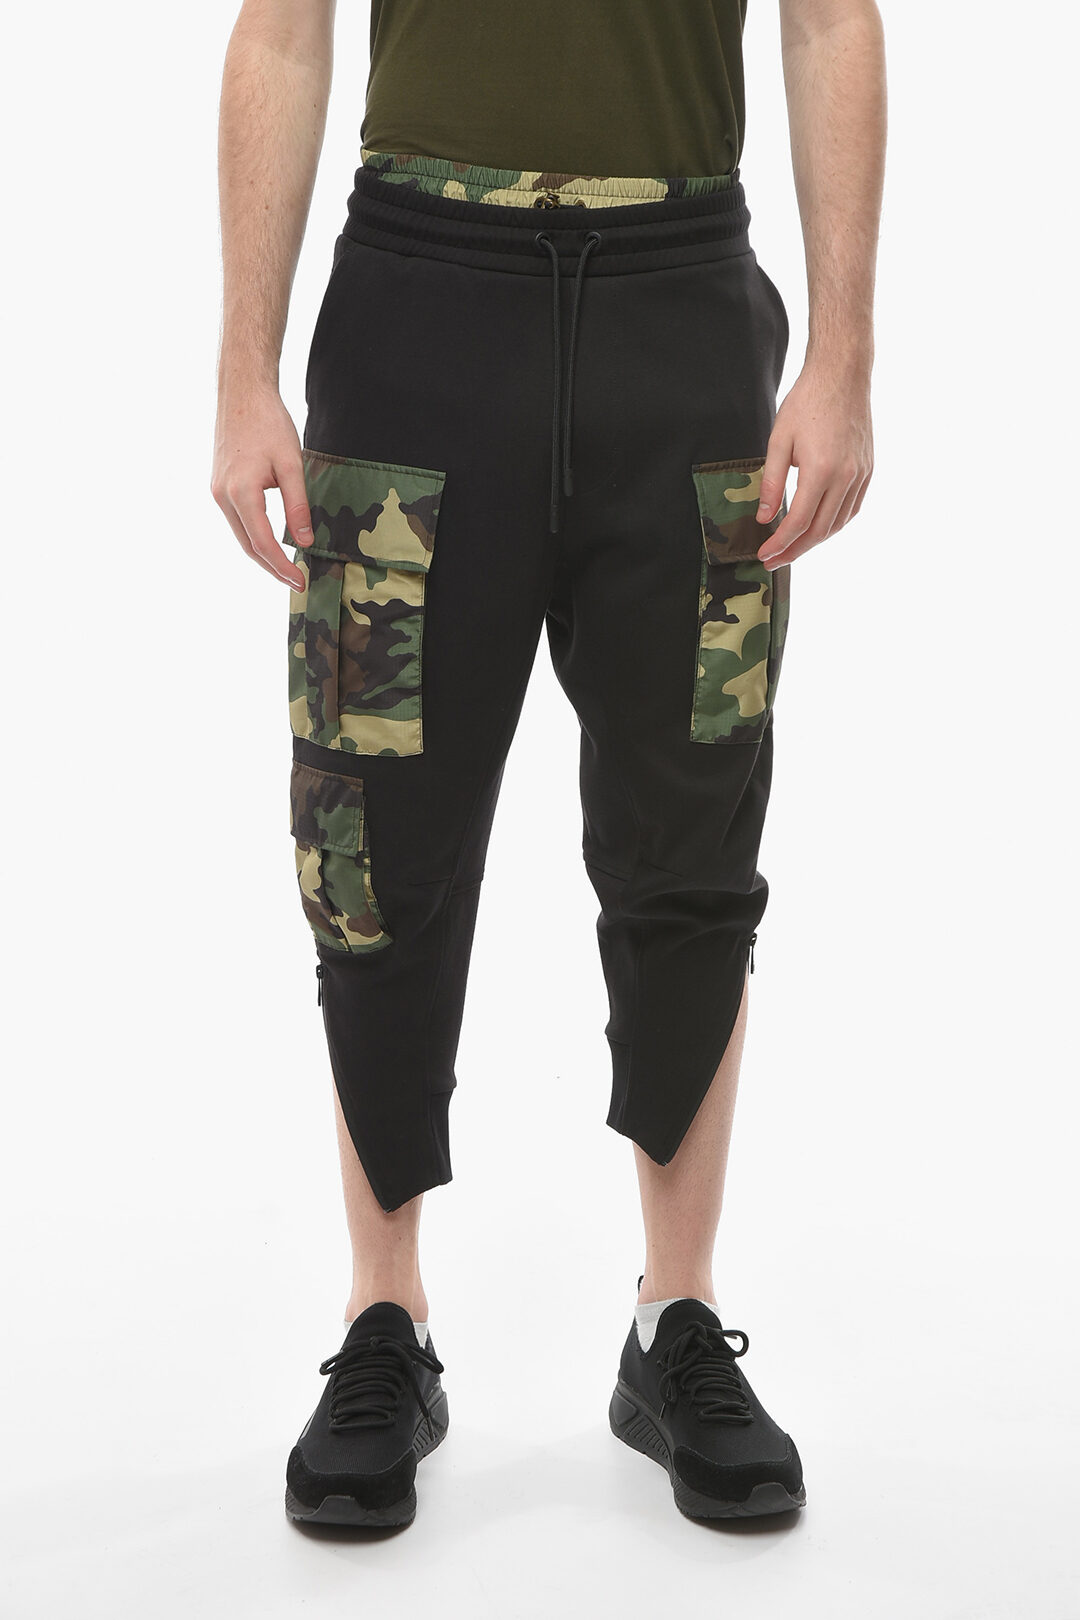 Dolce & Gabbana Men's Camouflage-Print Cargo Trousers